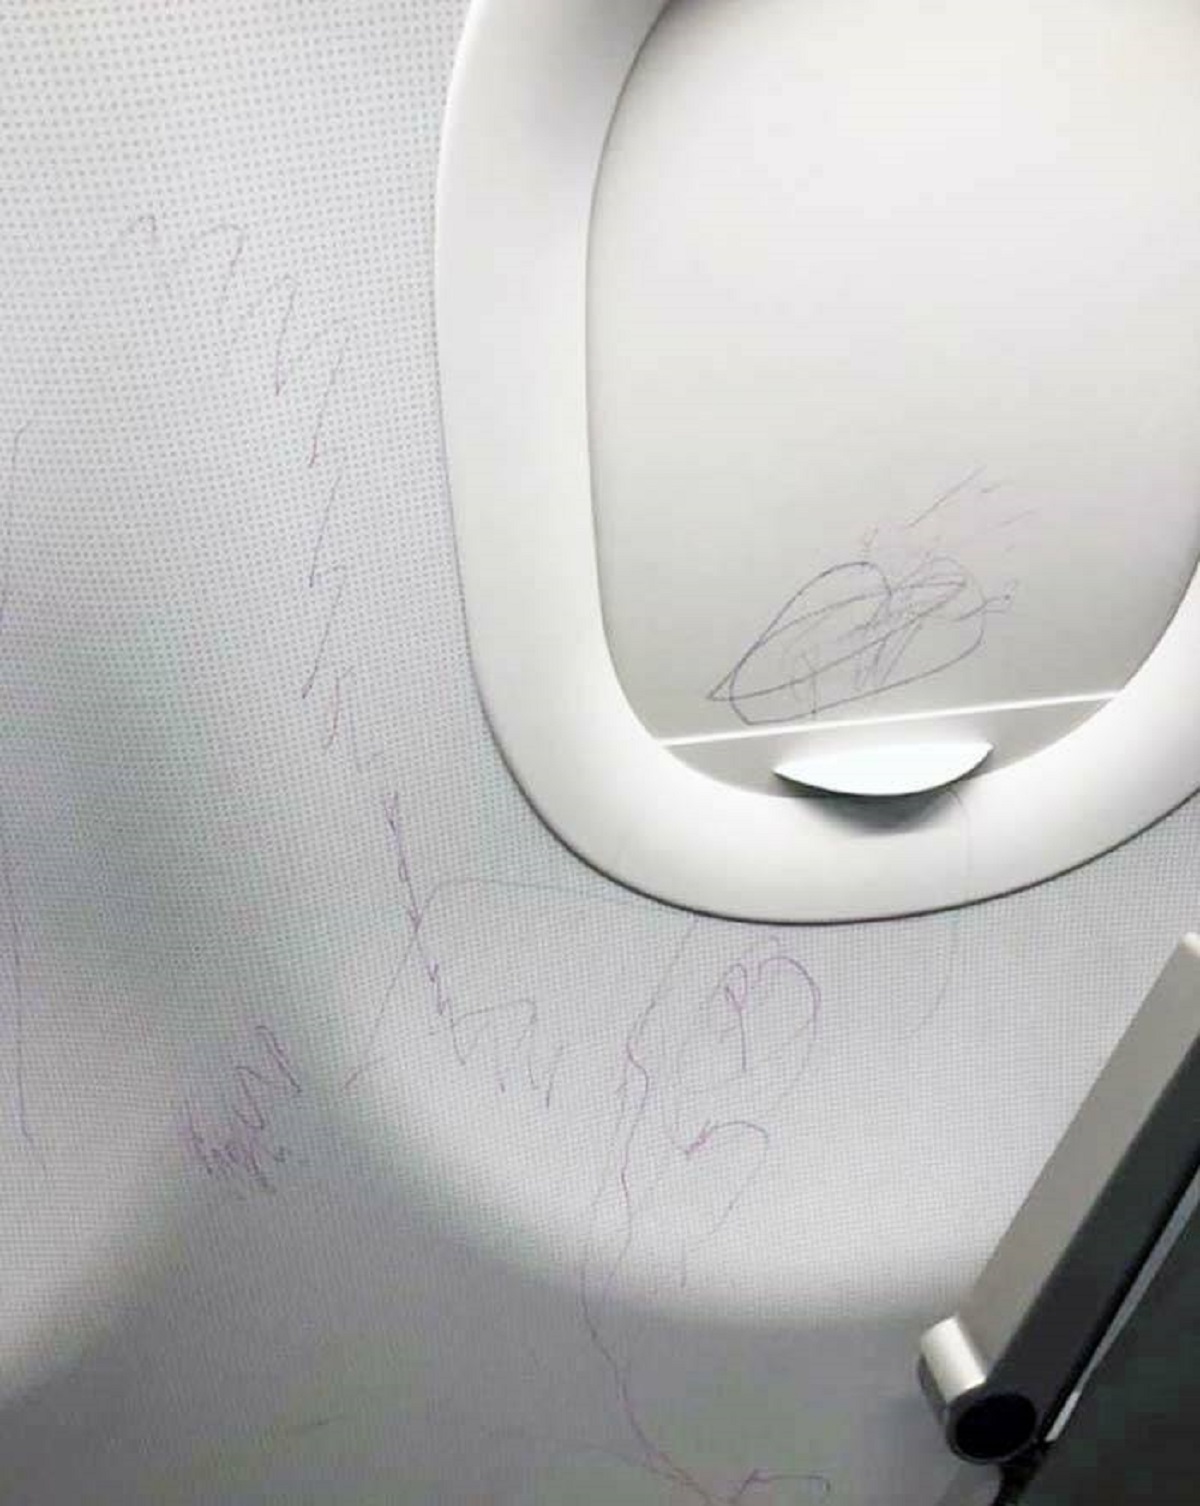 "Parents That Let Their Kids Deface A 3-Month-Old Plane"